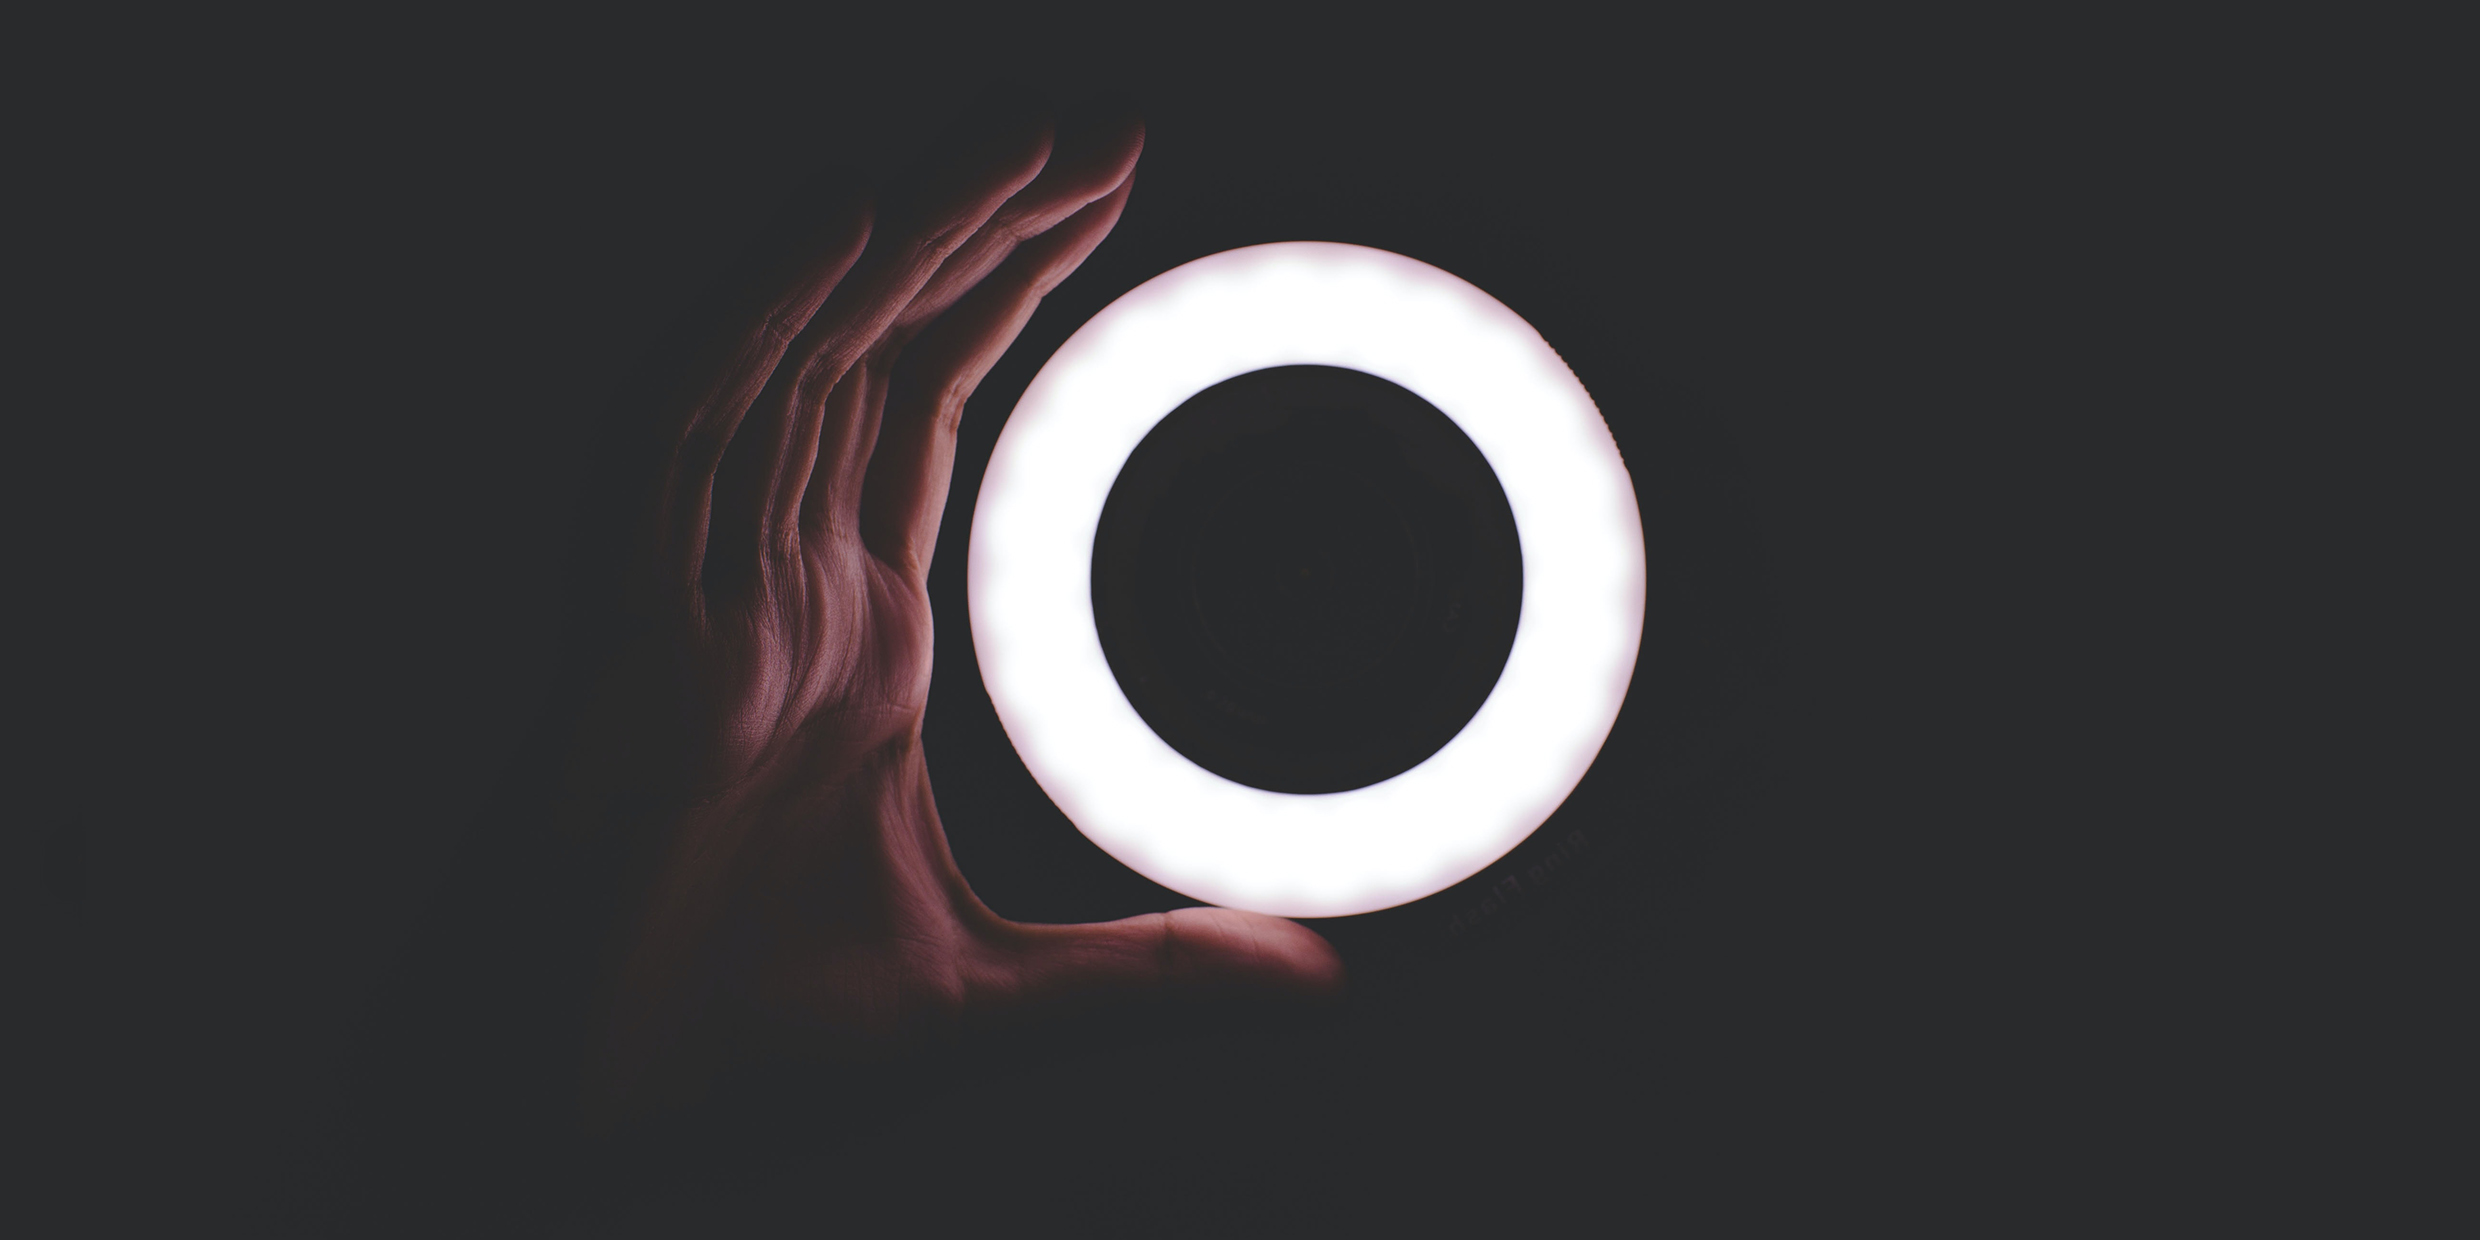 Image of a hand grasping for a glowing circle of light in a dark space